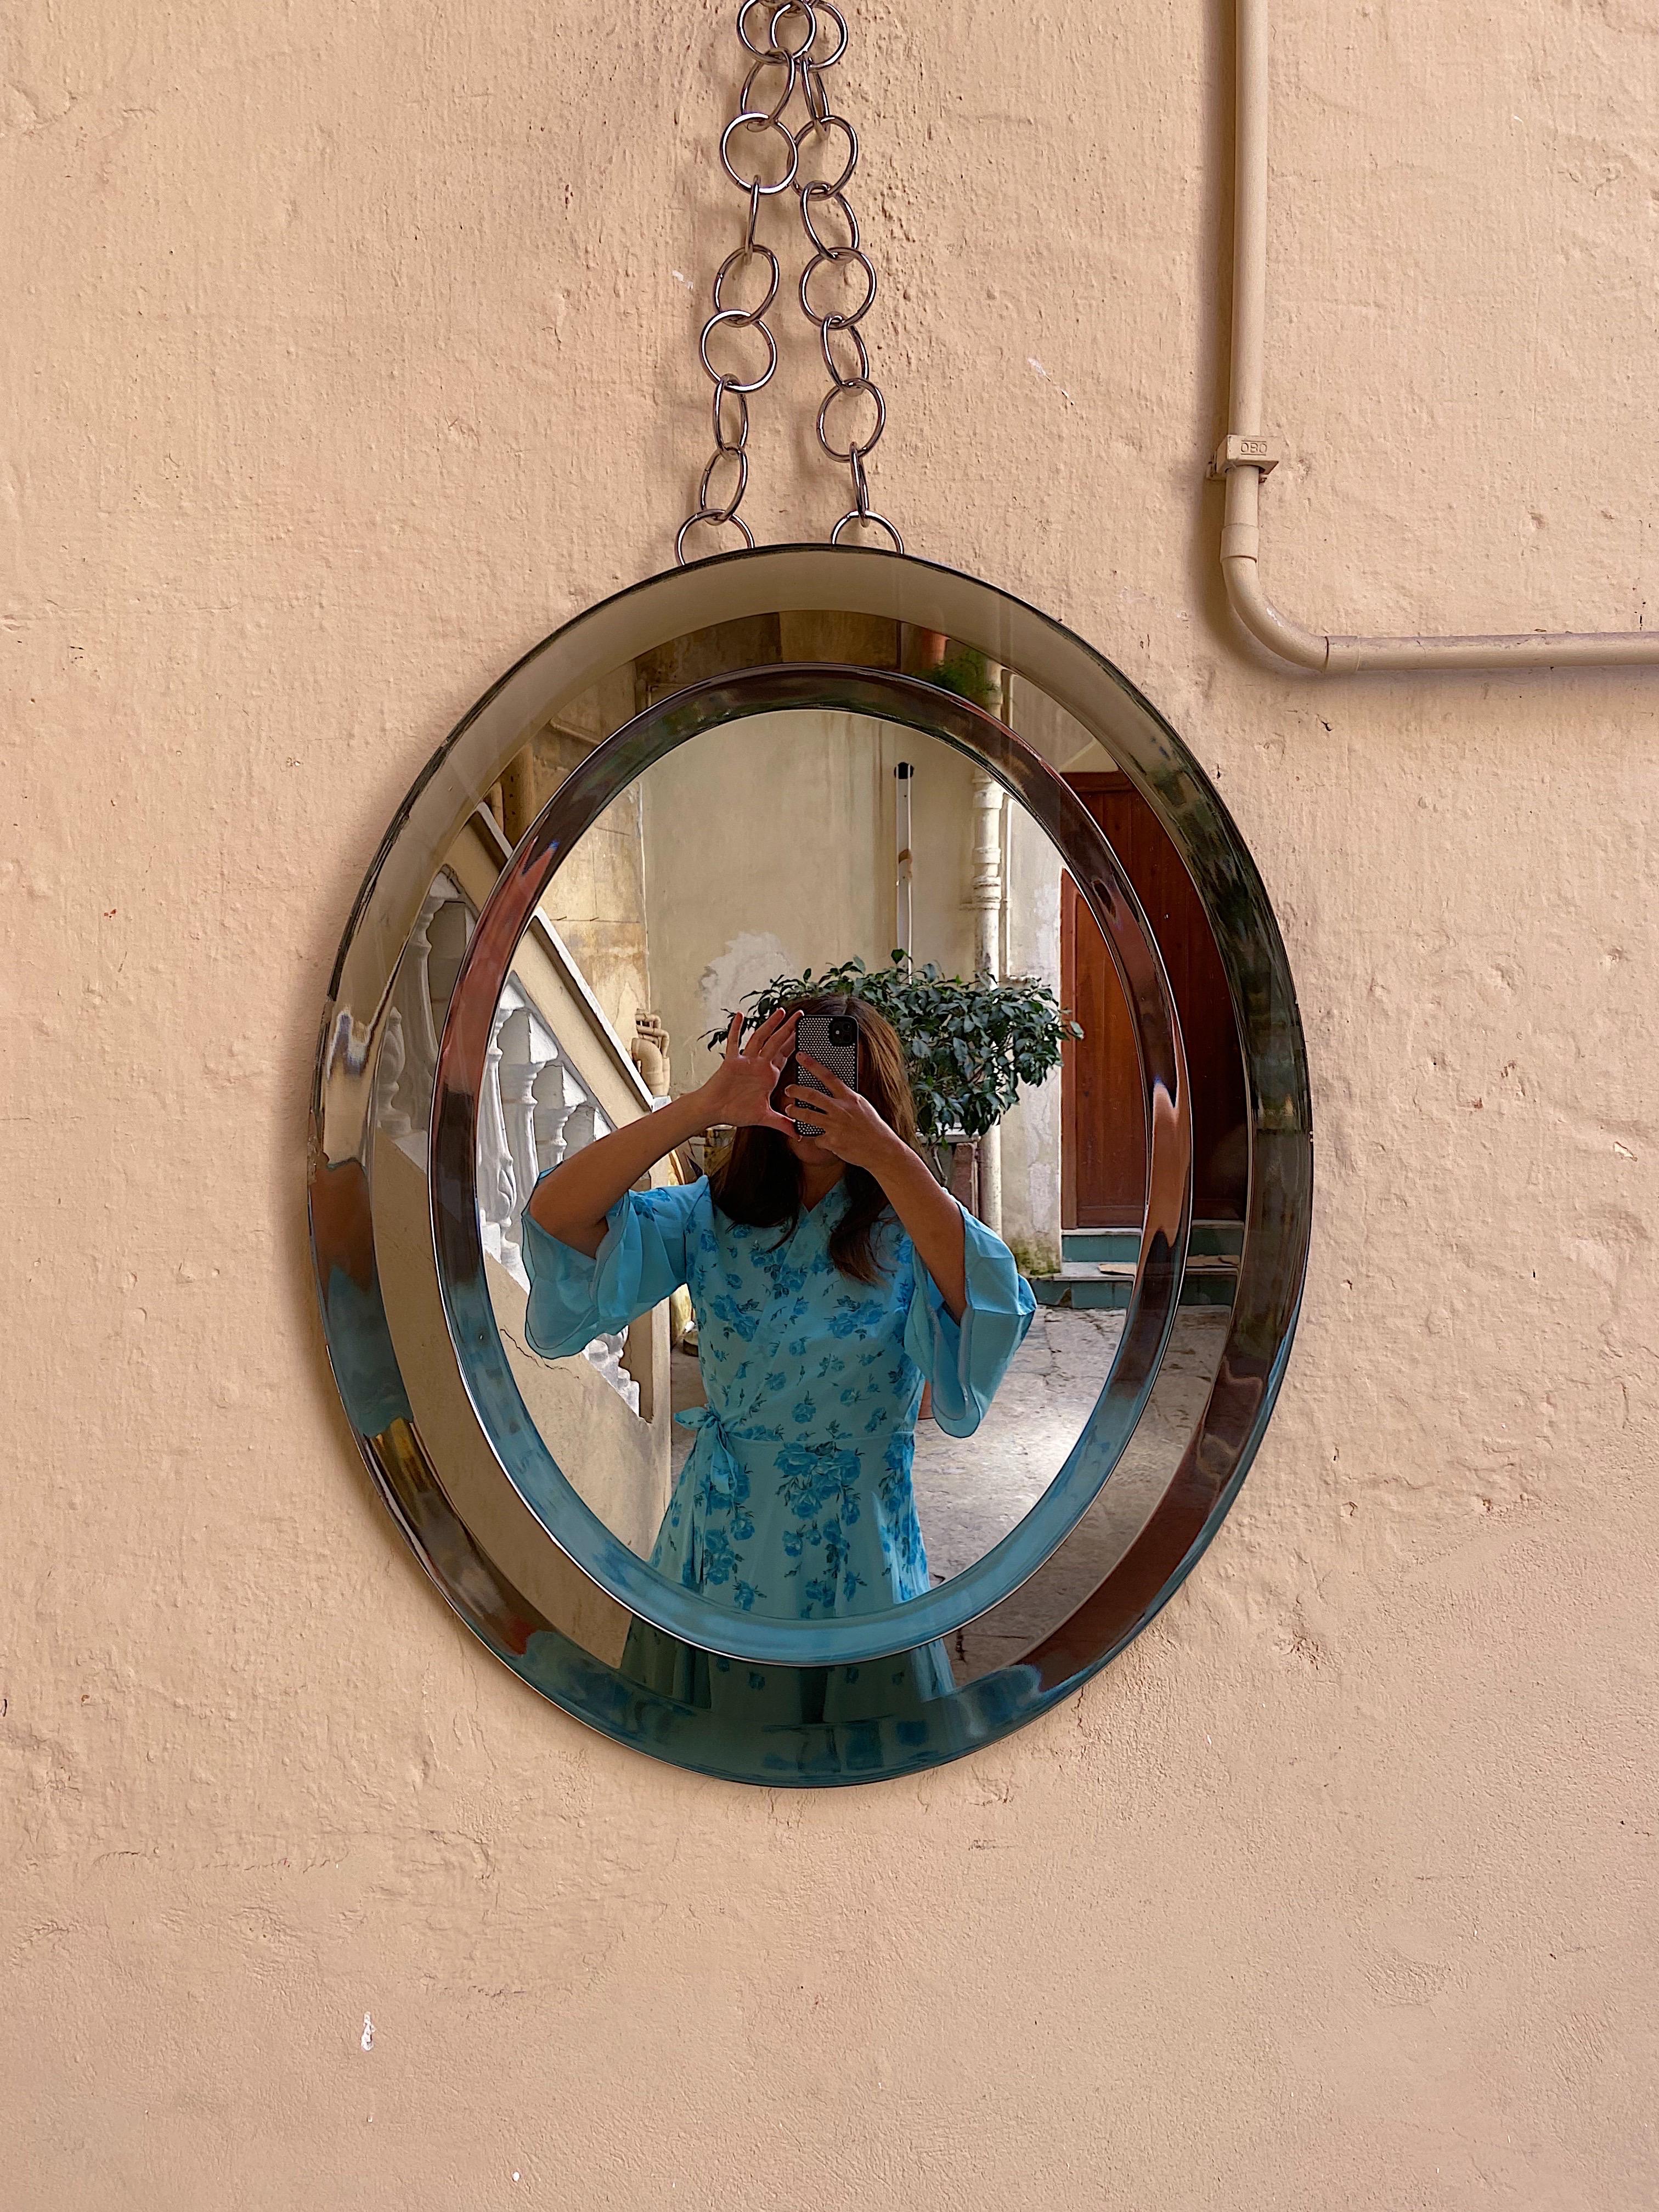 Breathtaking midcentury wall mirror from the creator Crystal Arte. This fantastic piece was produced in 1960s, Italy, Torino. It has a beautiful frame glass in ”silver-fume ” very rare since they mostly were produced in blue.
Notice that the mirror